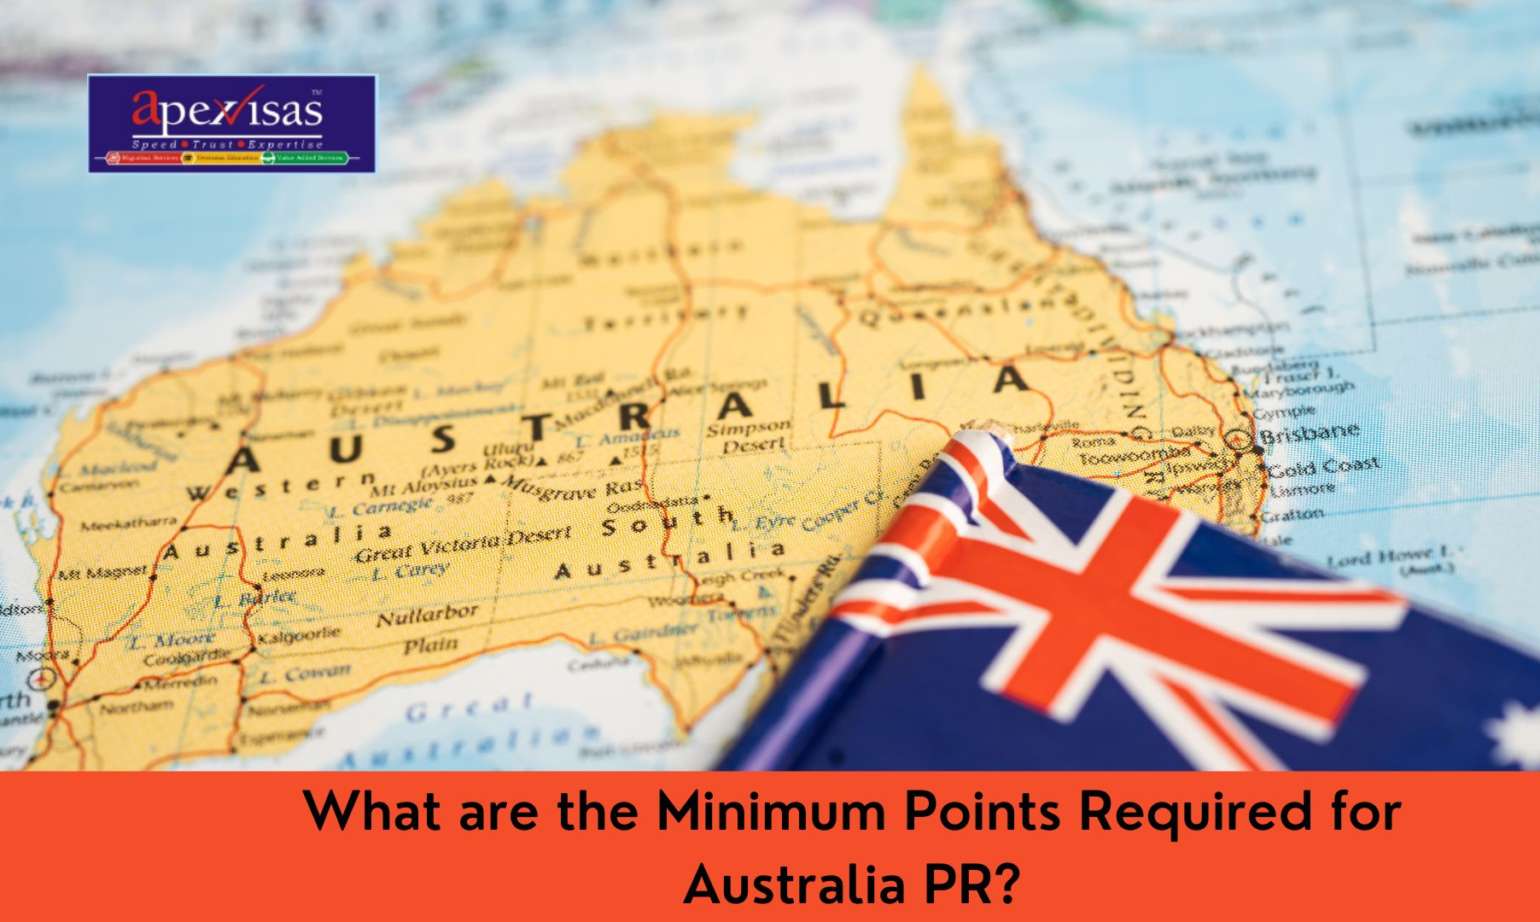 What are the Minimum Points Required for Australia PR?